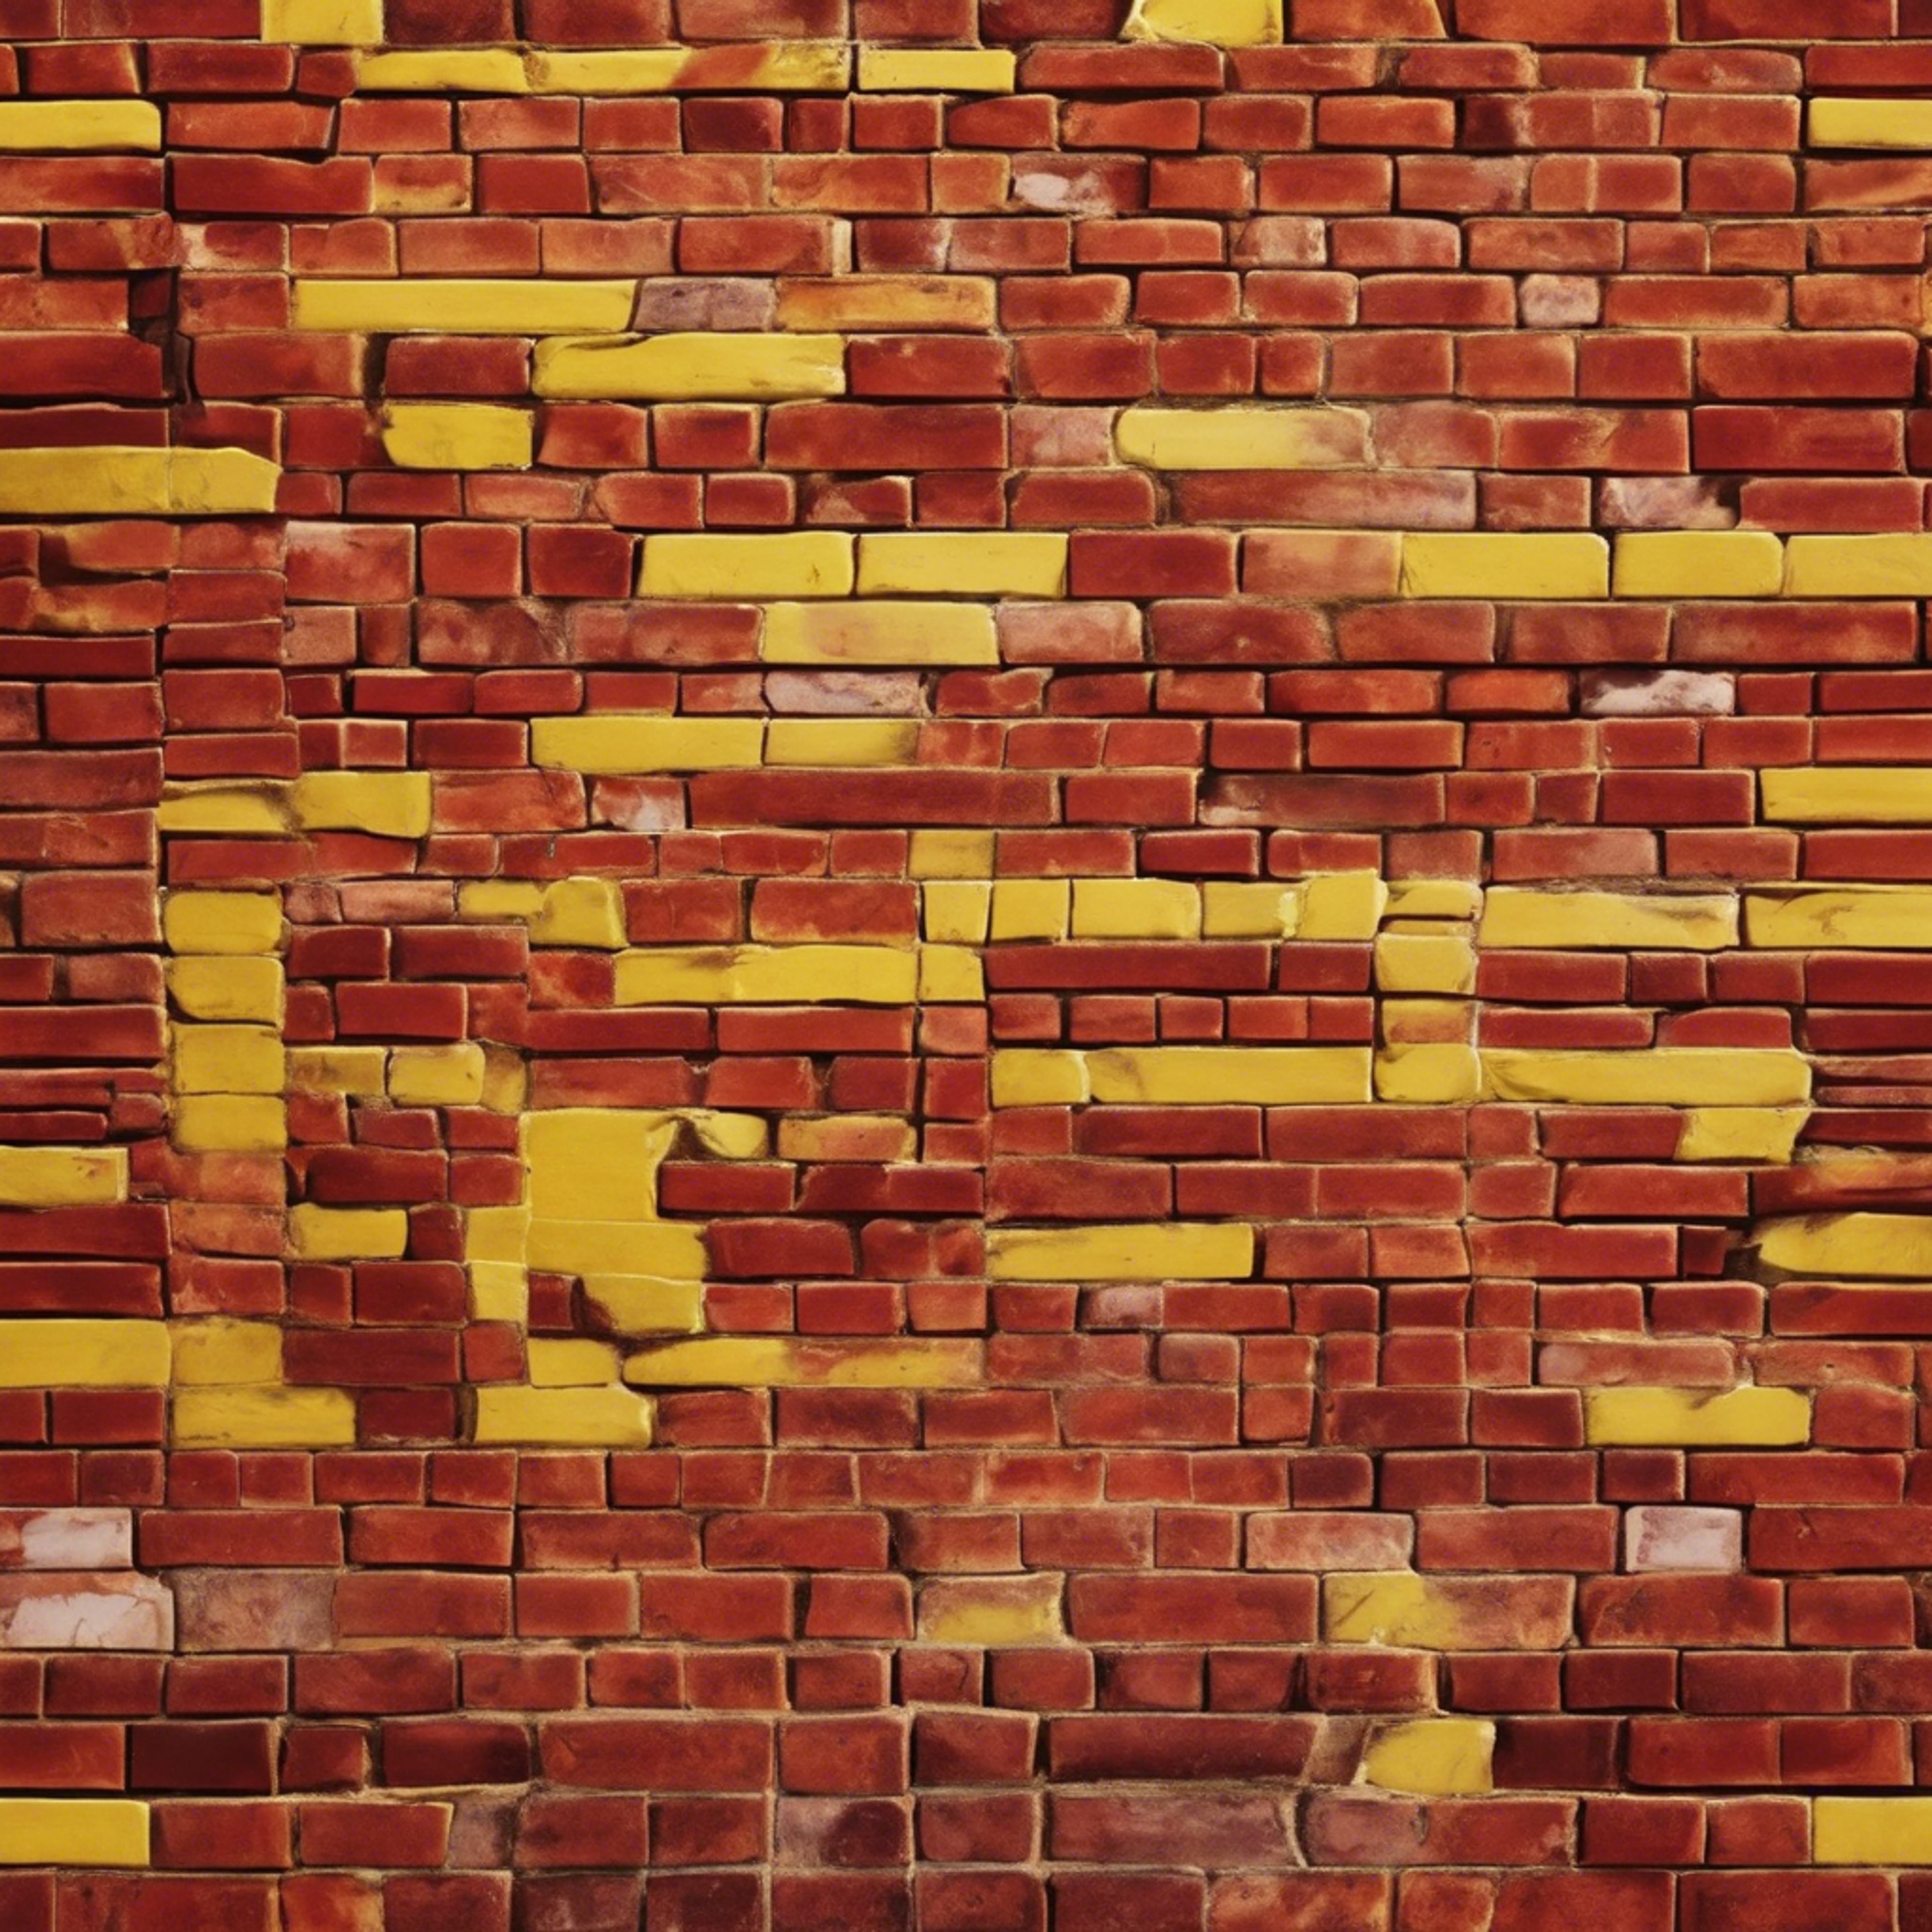 Red and yellow brick pattern seen through the illusion of a watery surface - the bricks appear slightly distorted yet colorful. Тапет[6ac5a5324f9a41fcbc3c]